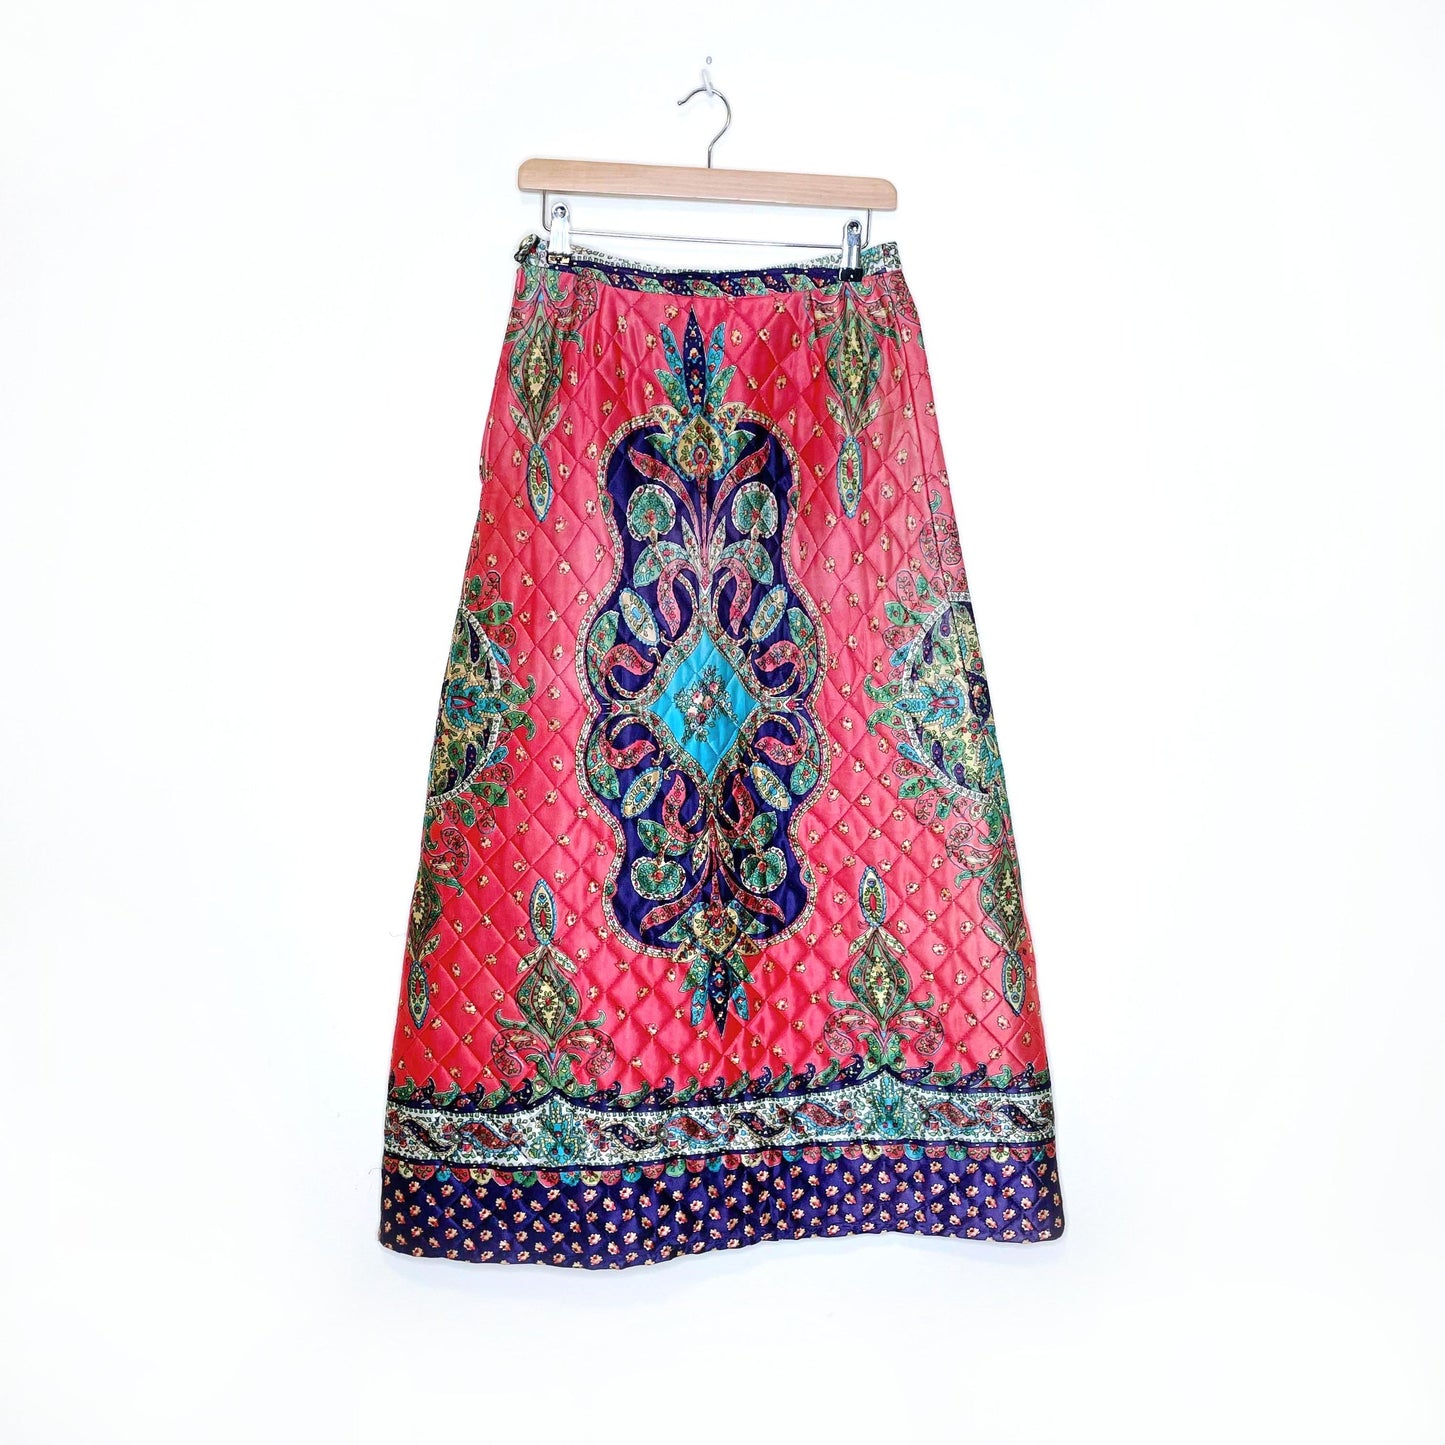 vintage 60's boho quilted maxi skirt - size small